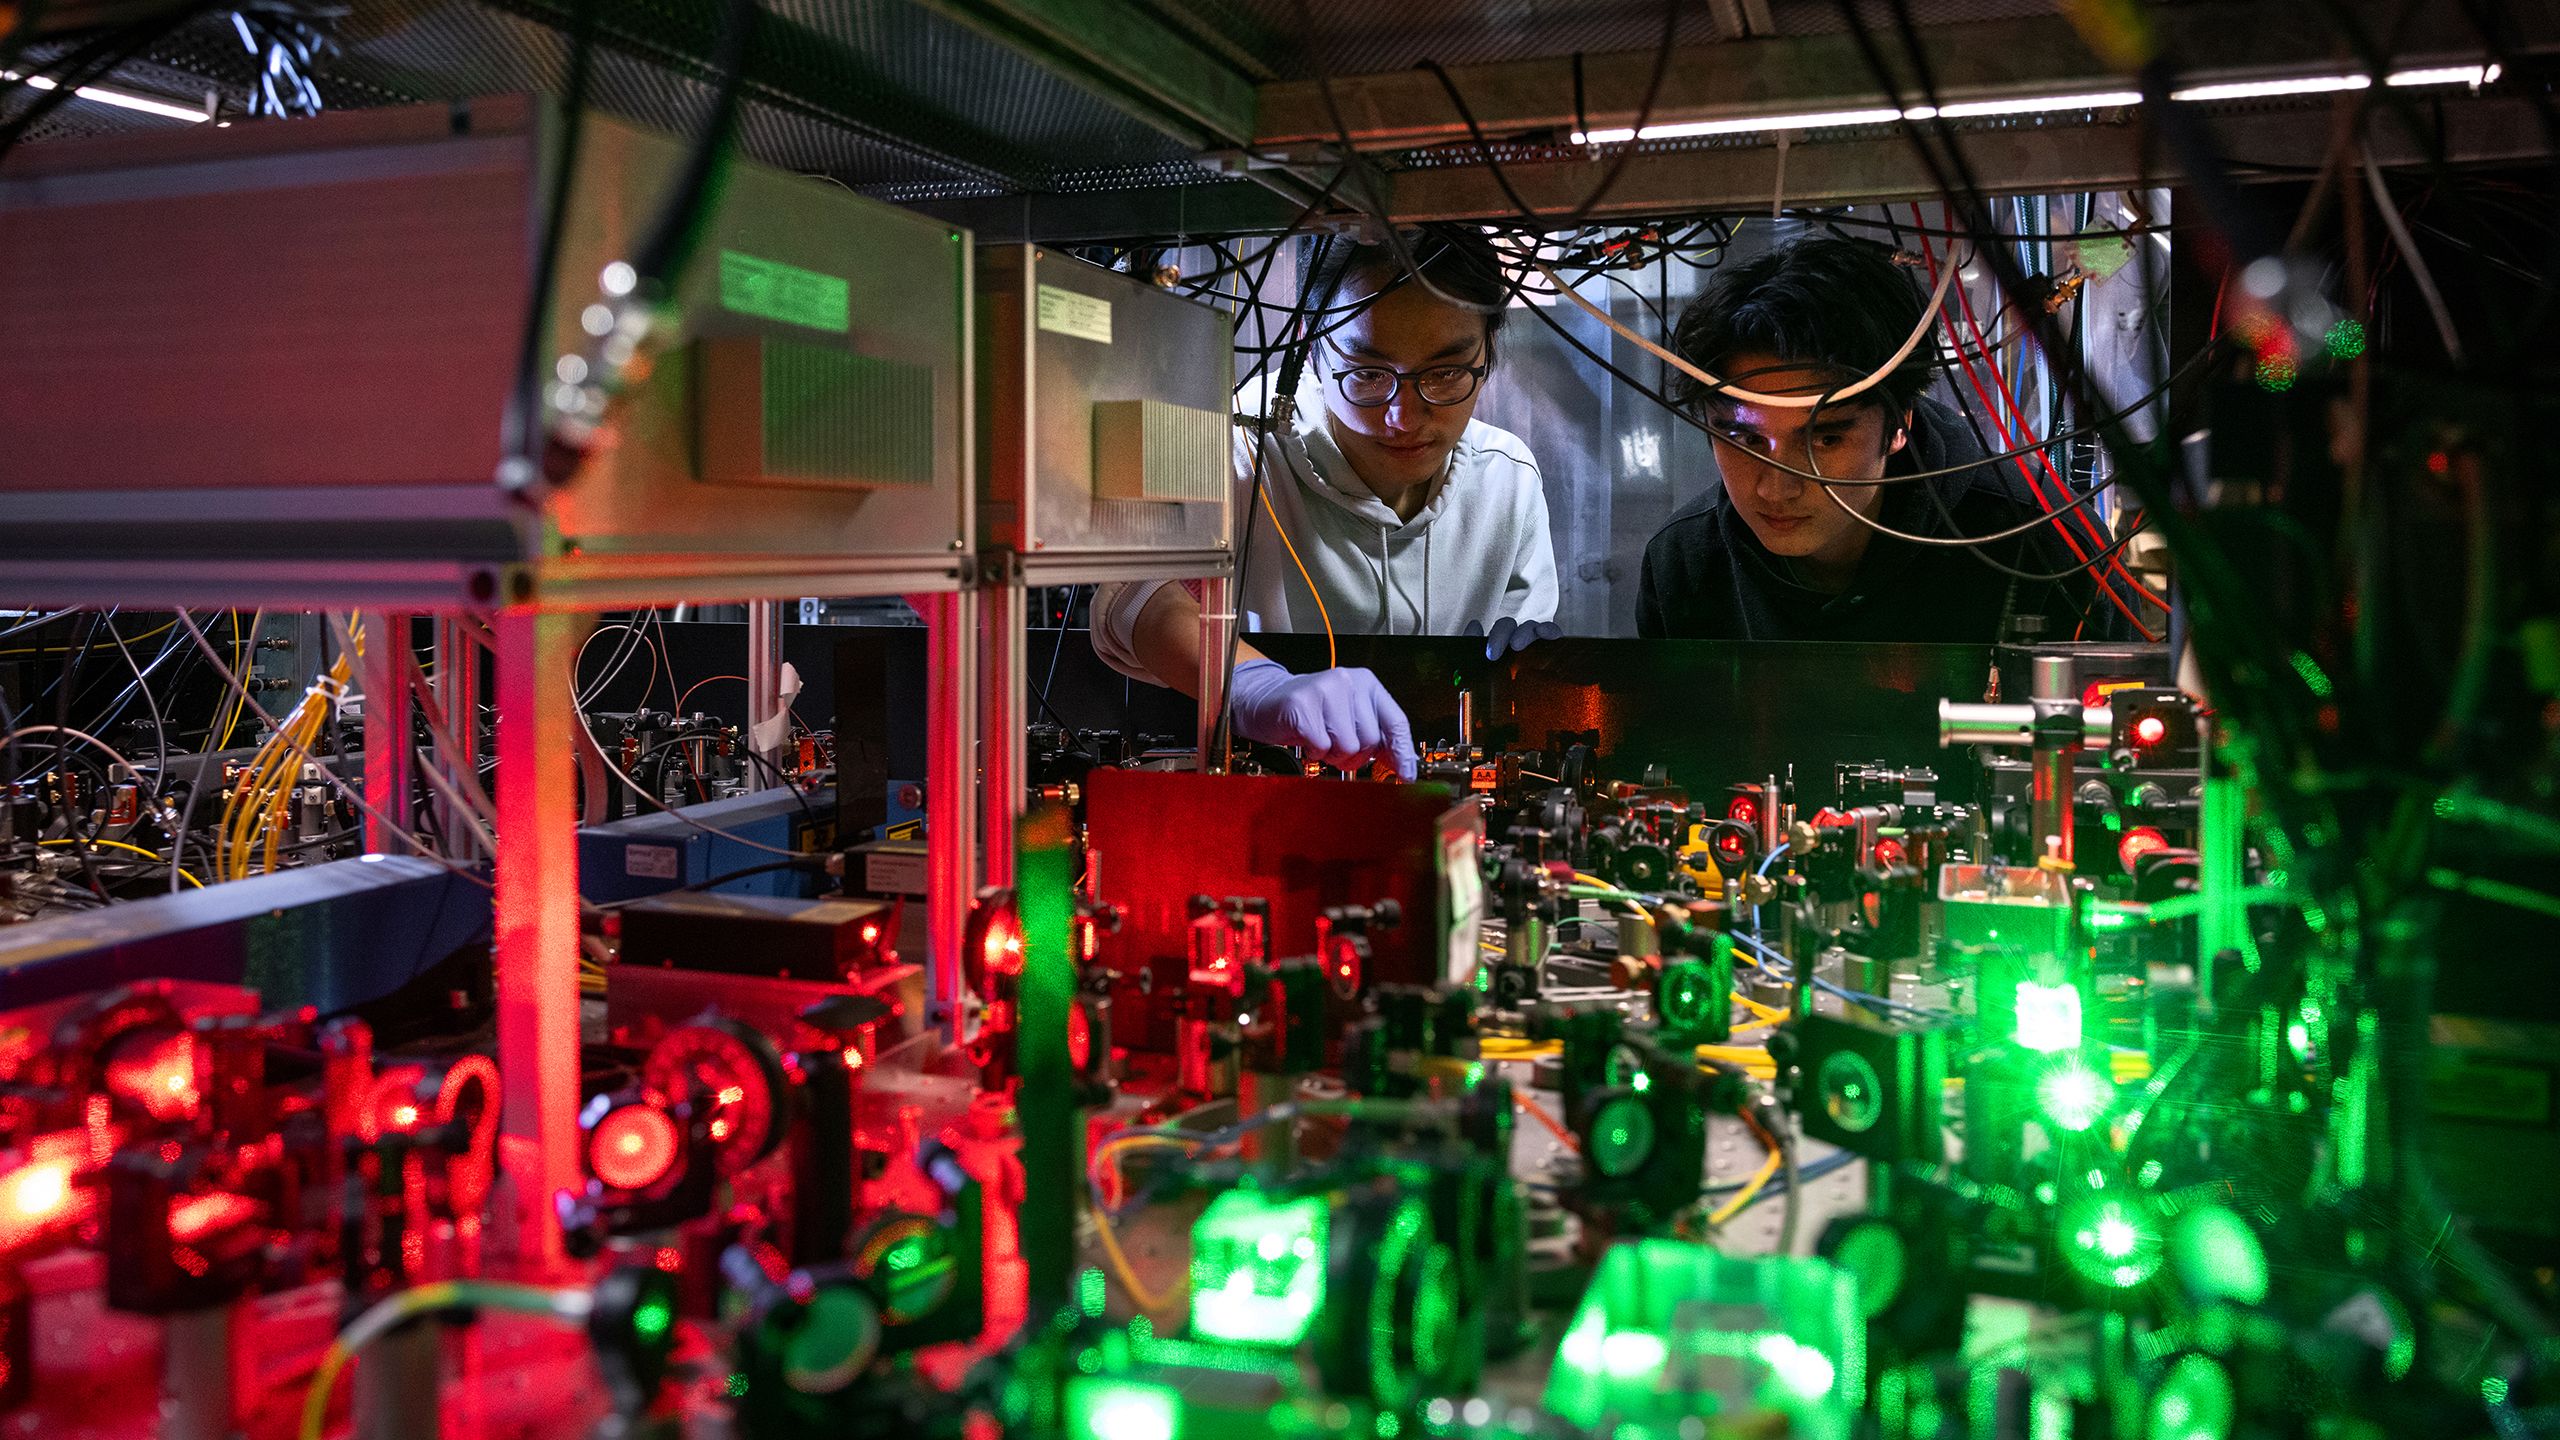 Two Imperial scientists examine lasers on an optical table 